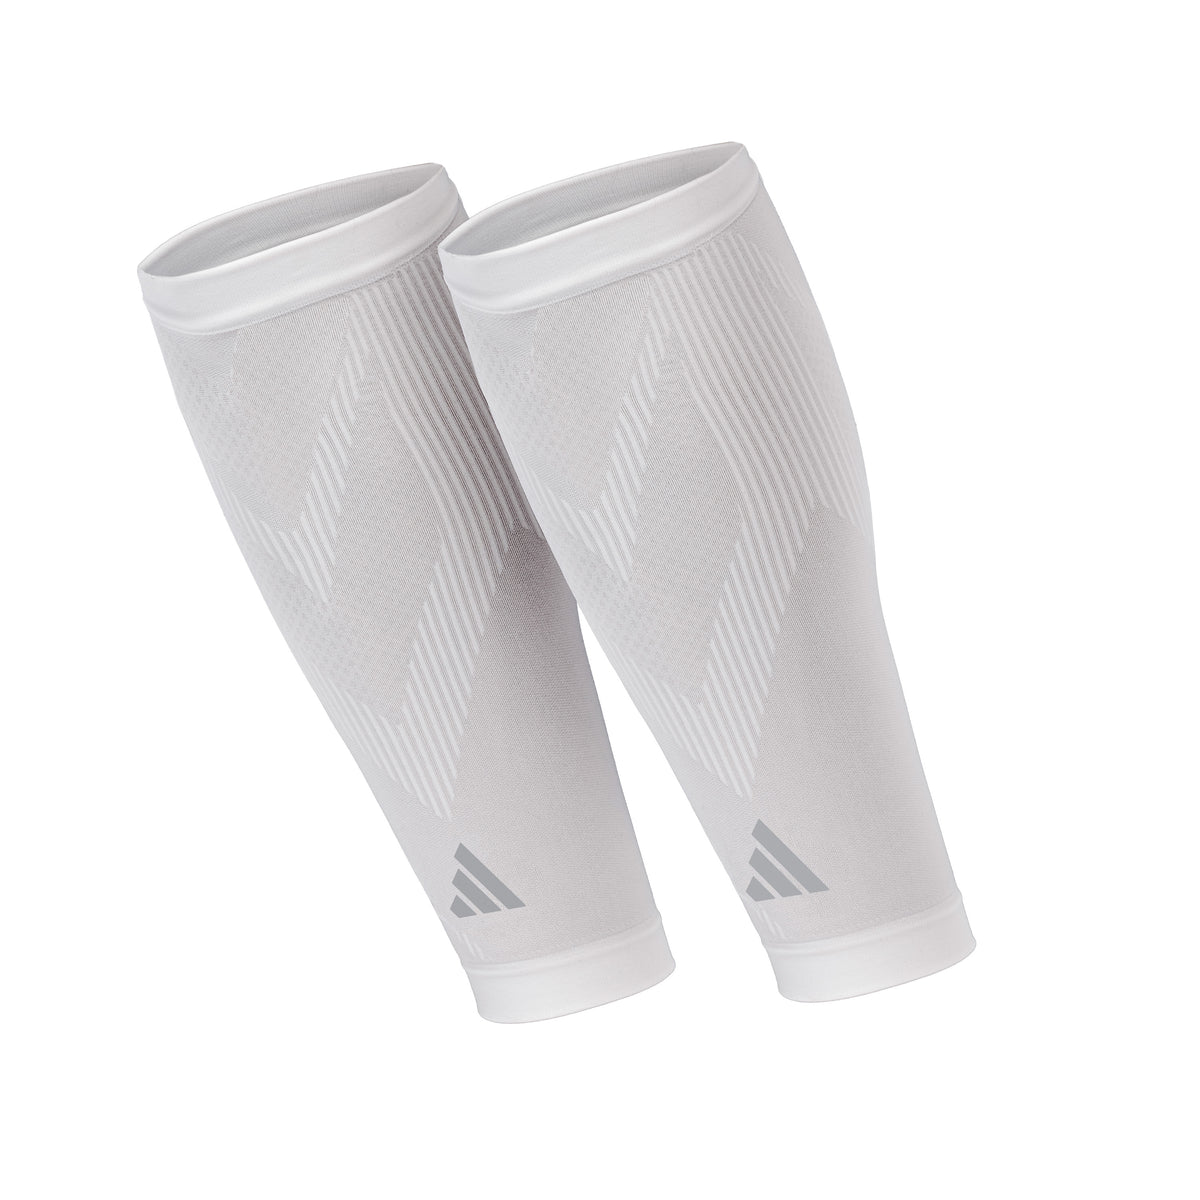 adidas Compression Calf Sleeves - White both sleeves